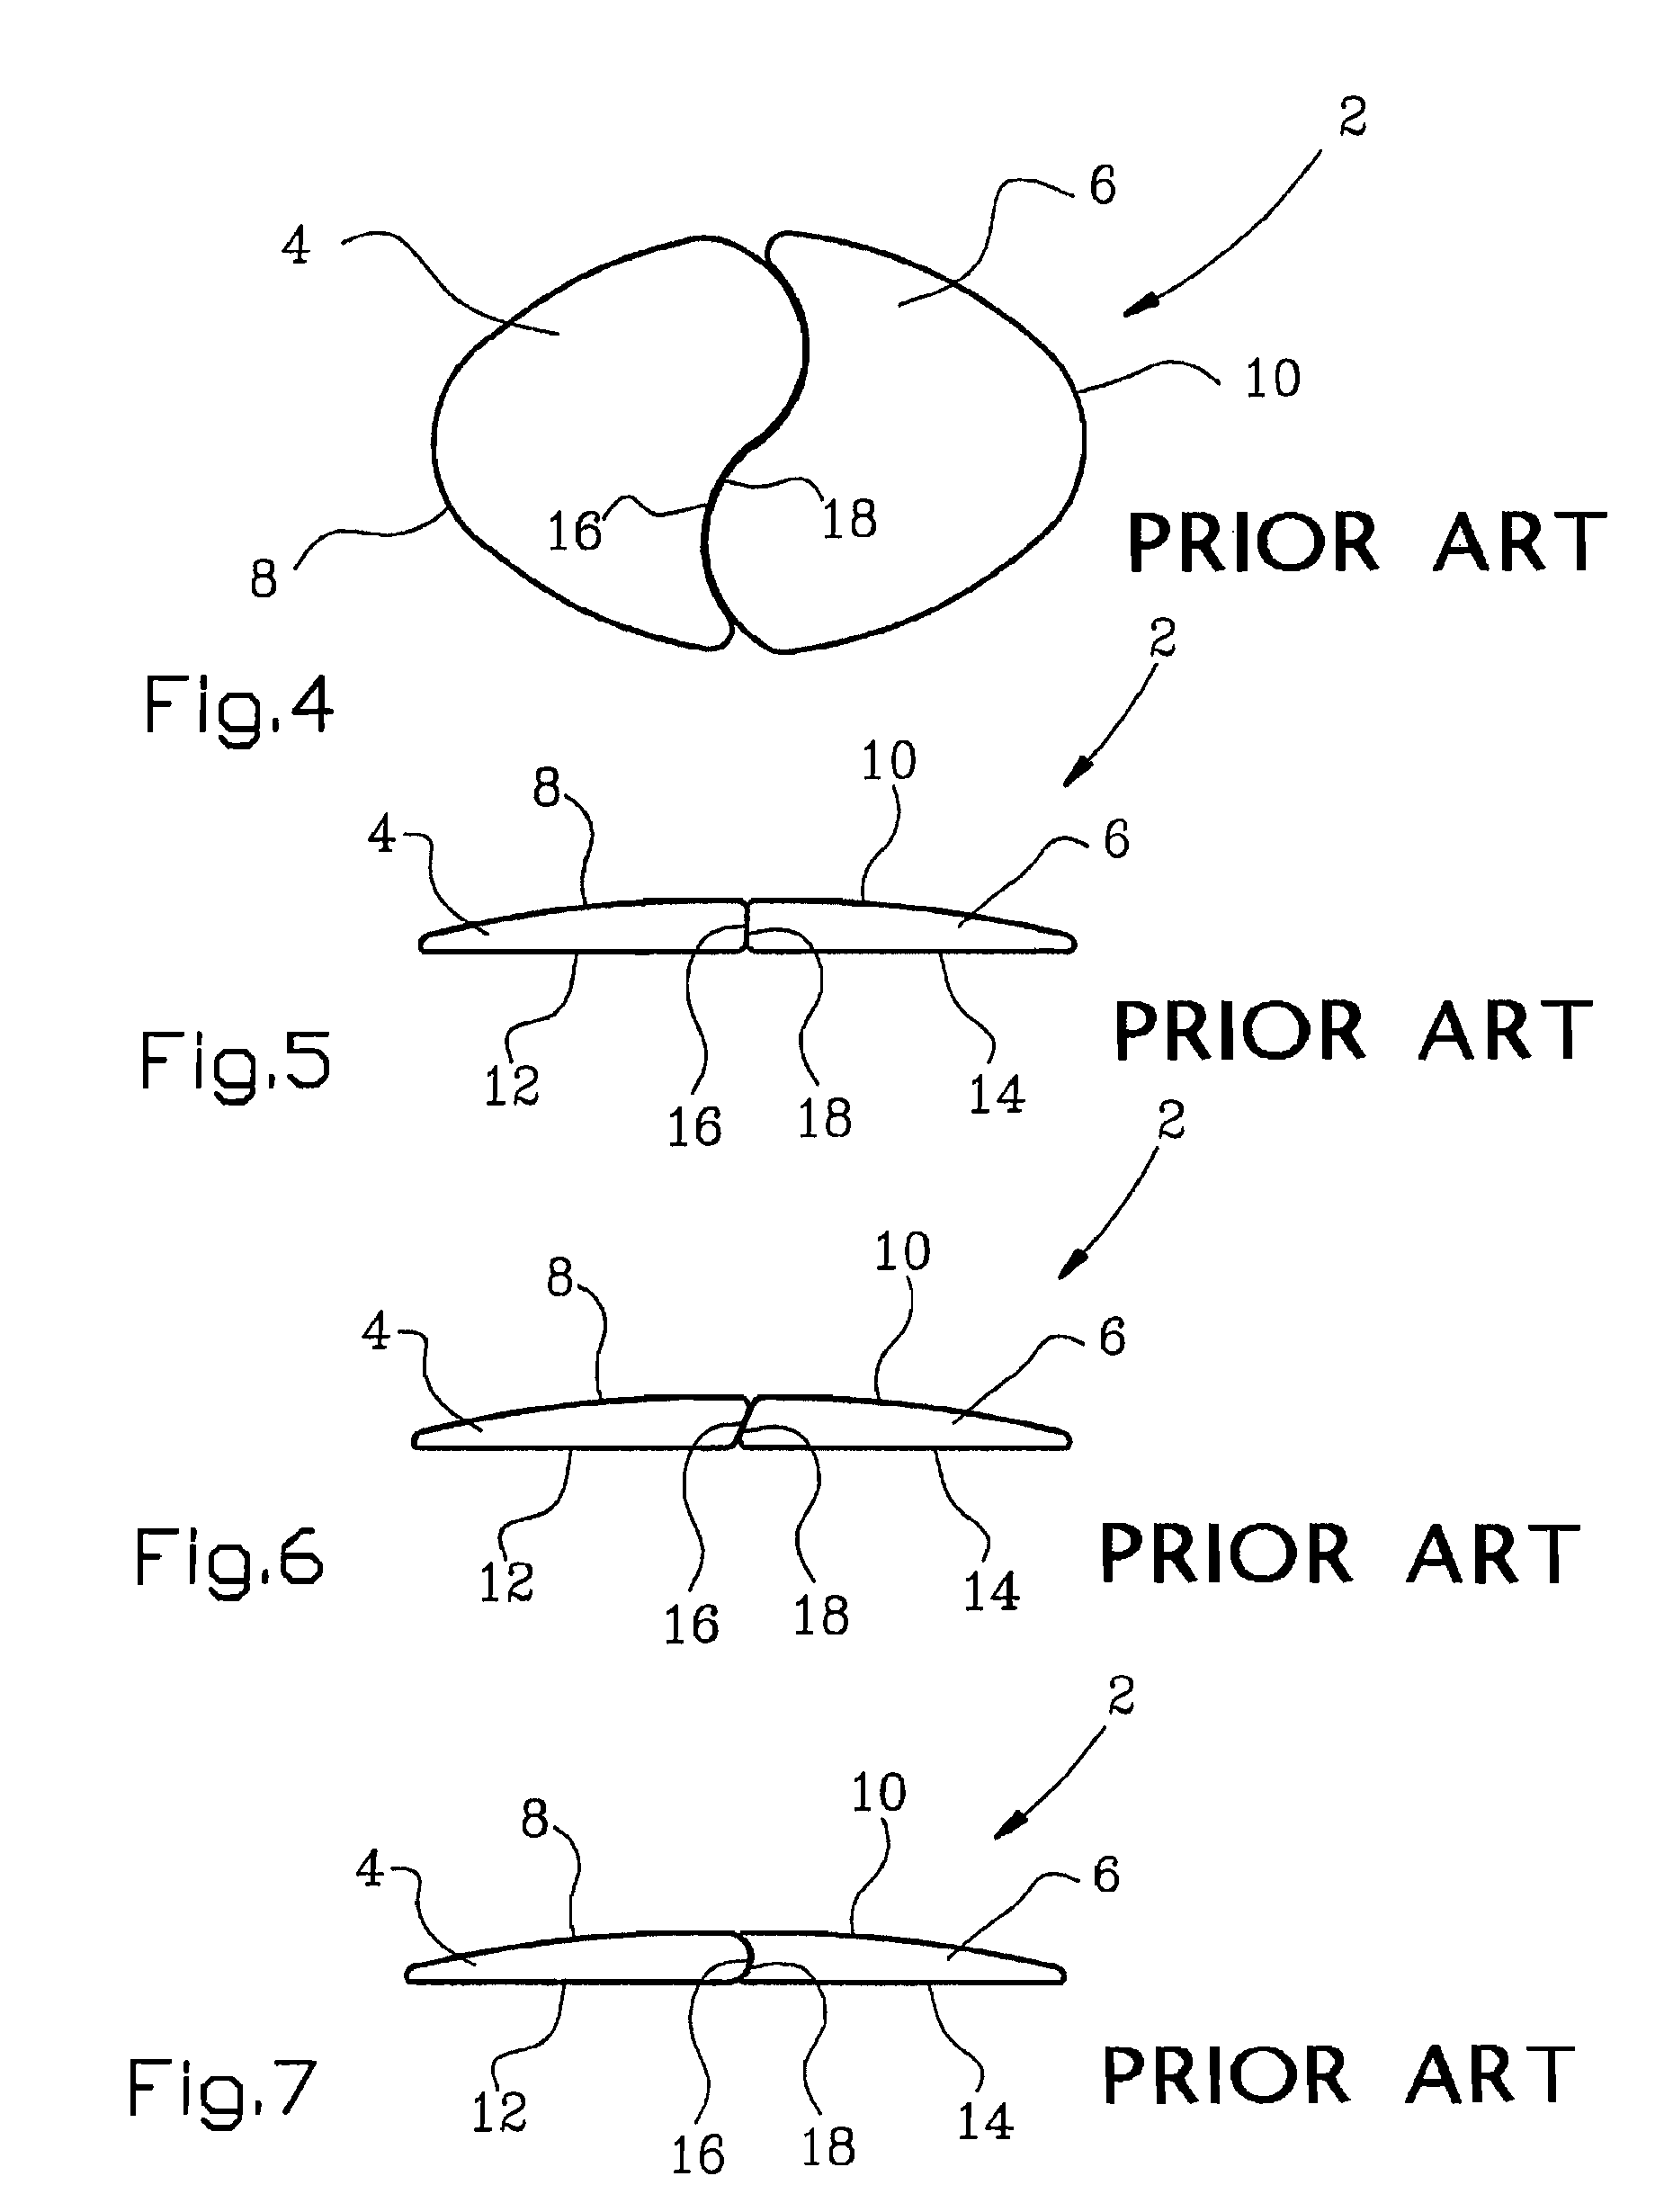 Mounting device for orthodontic retainer elements and a method of maintaining said elements in place for mounting on corresponding teeth